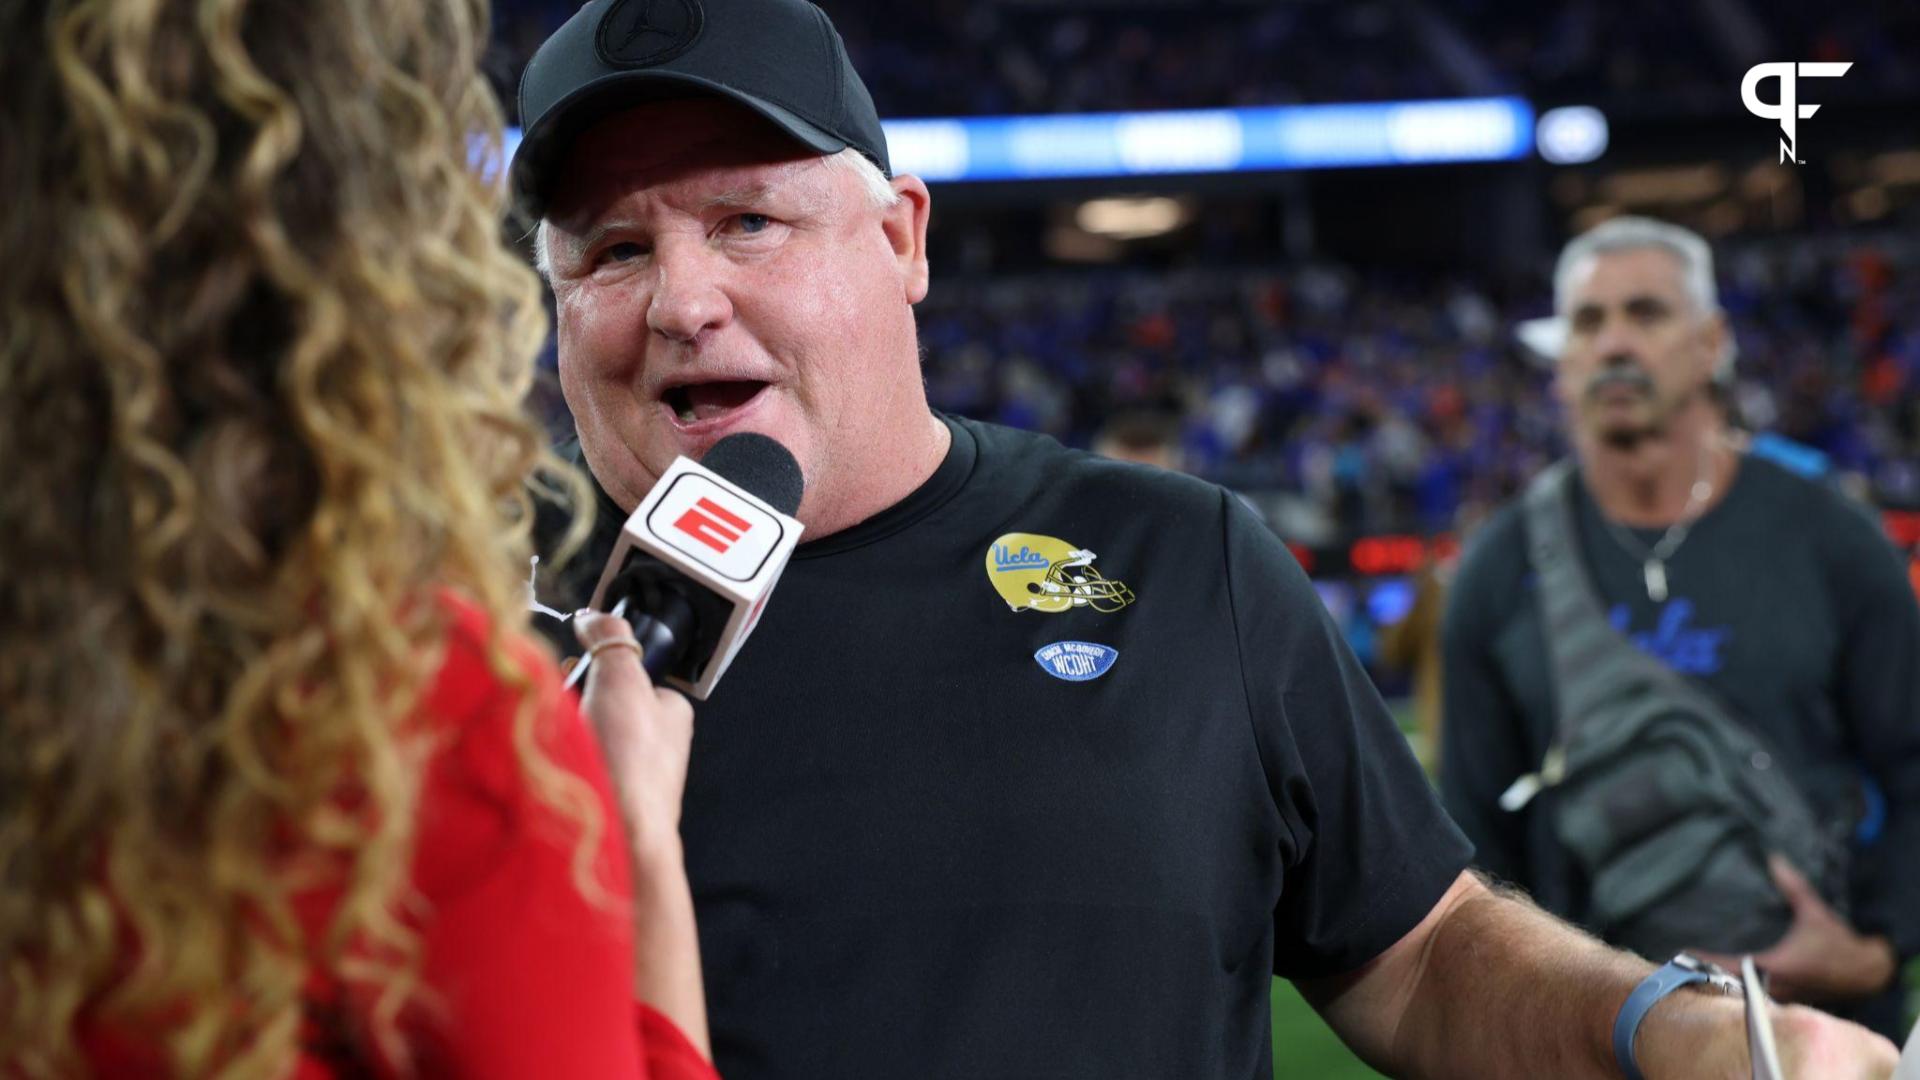 UCLA Bruins head coach Chip Kelly speaks at post game interview after defeating the Boise State Broncos 35-22 during the LA Bowl at SoFi Stadium.